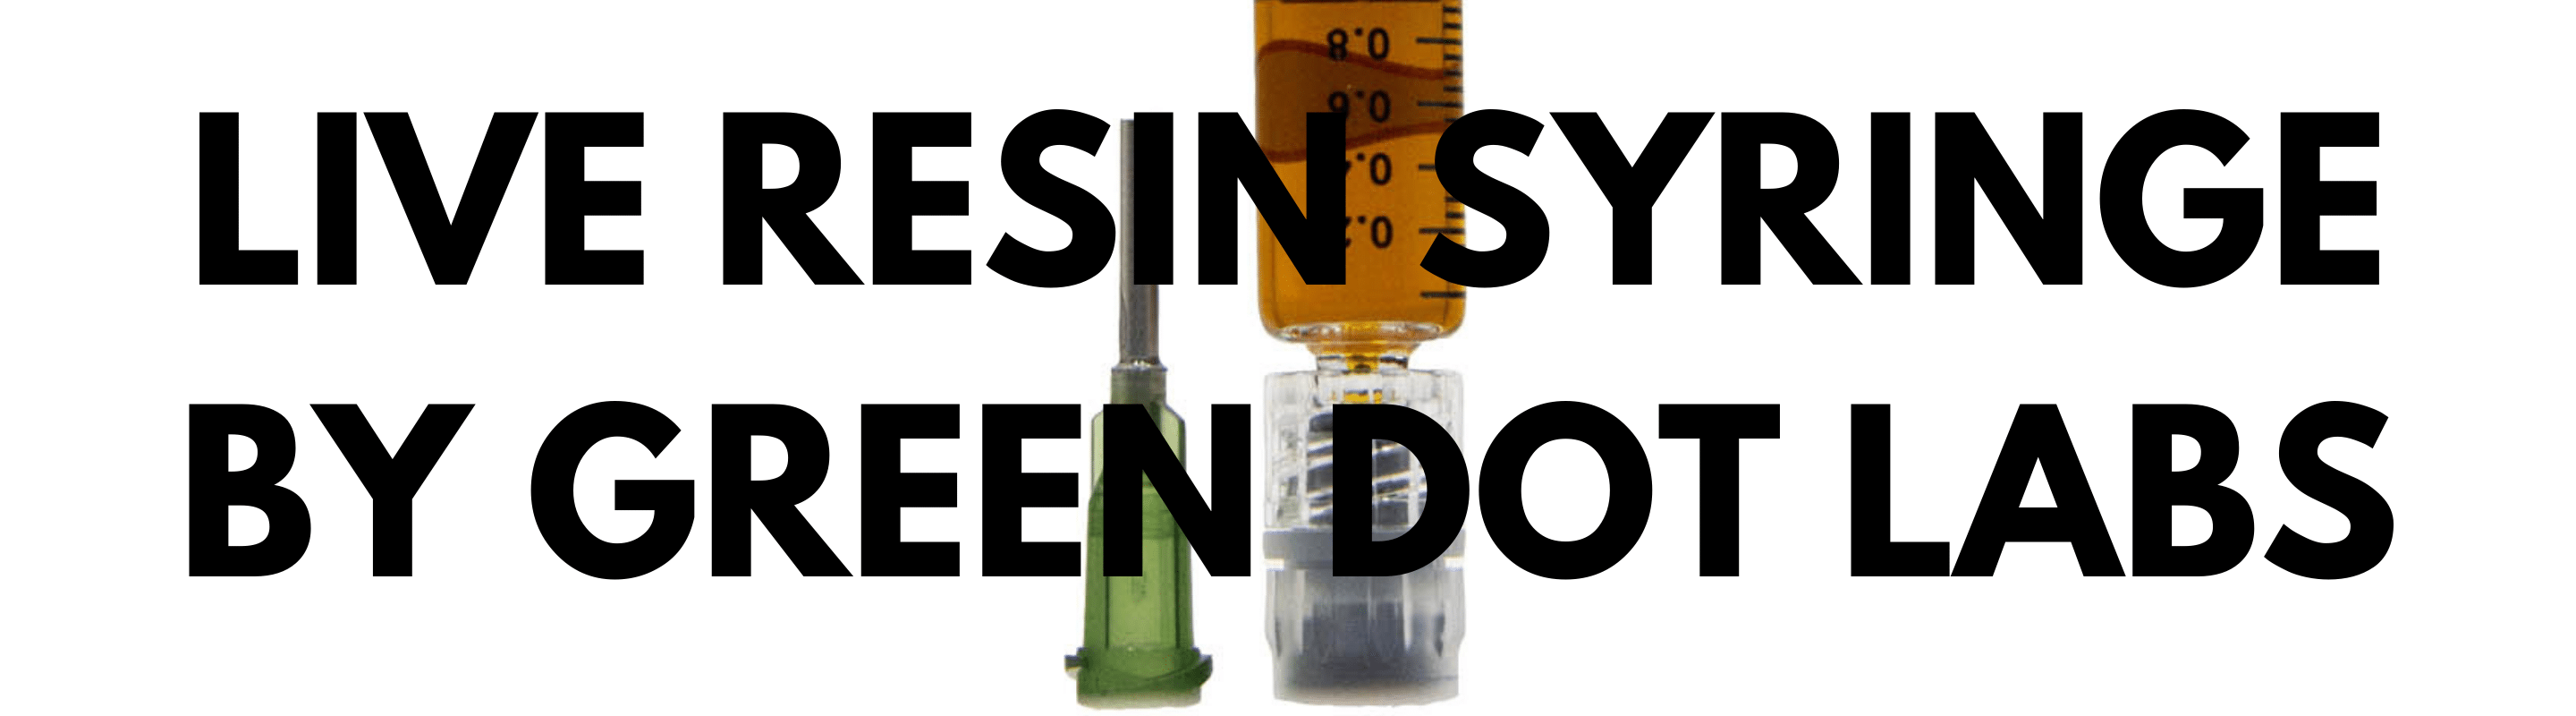 Live Resin Syringe By Green Dot Labs (1)